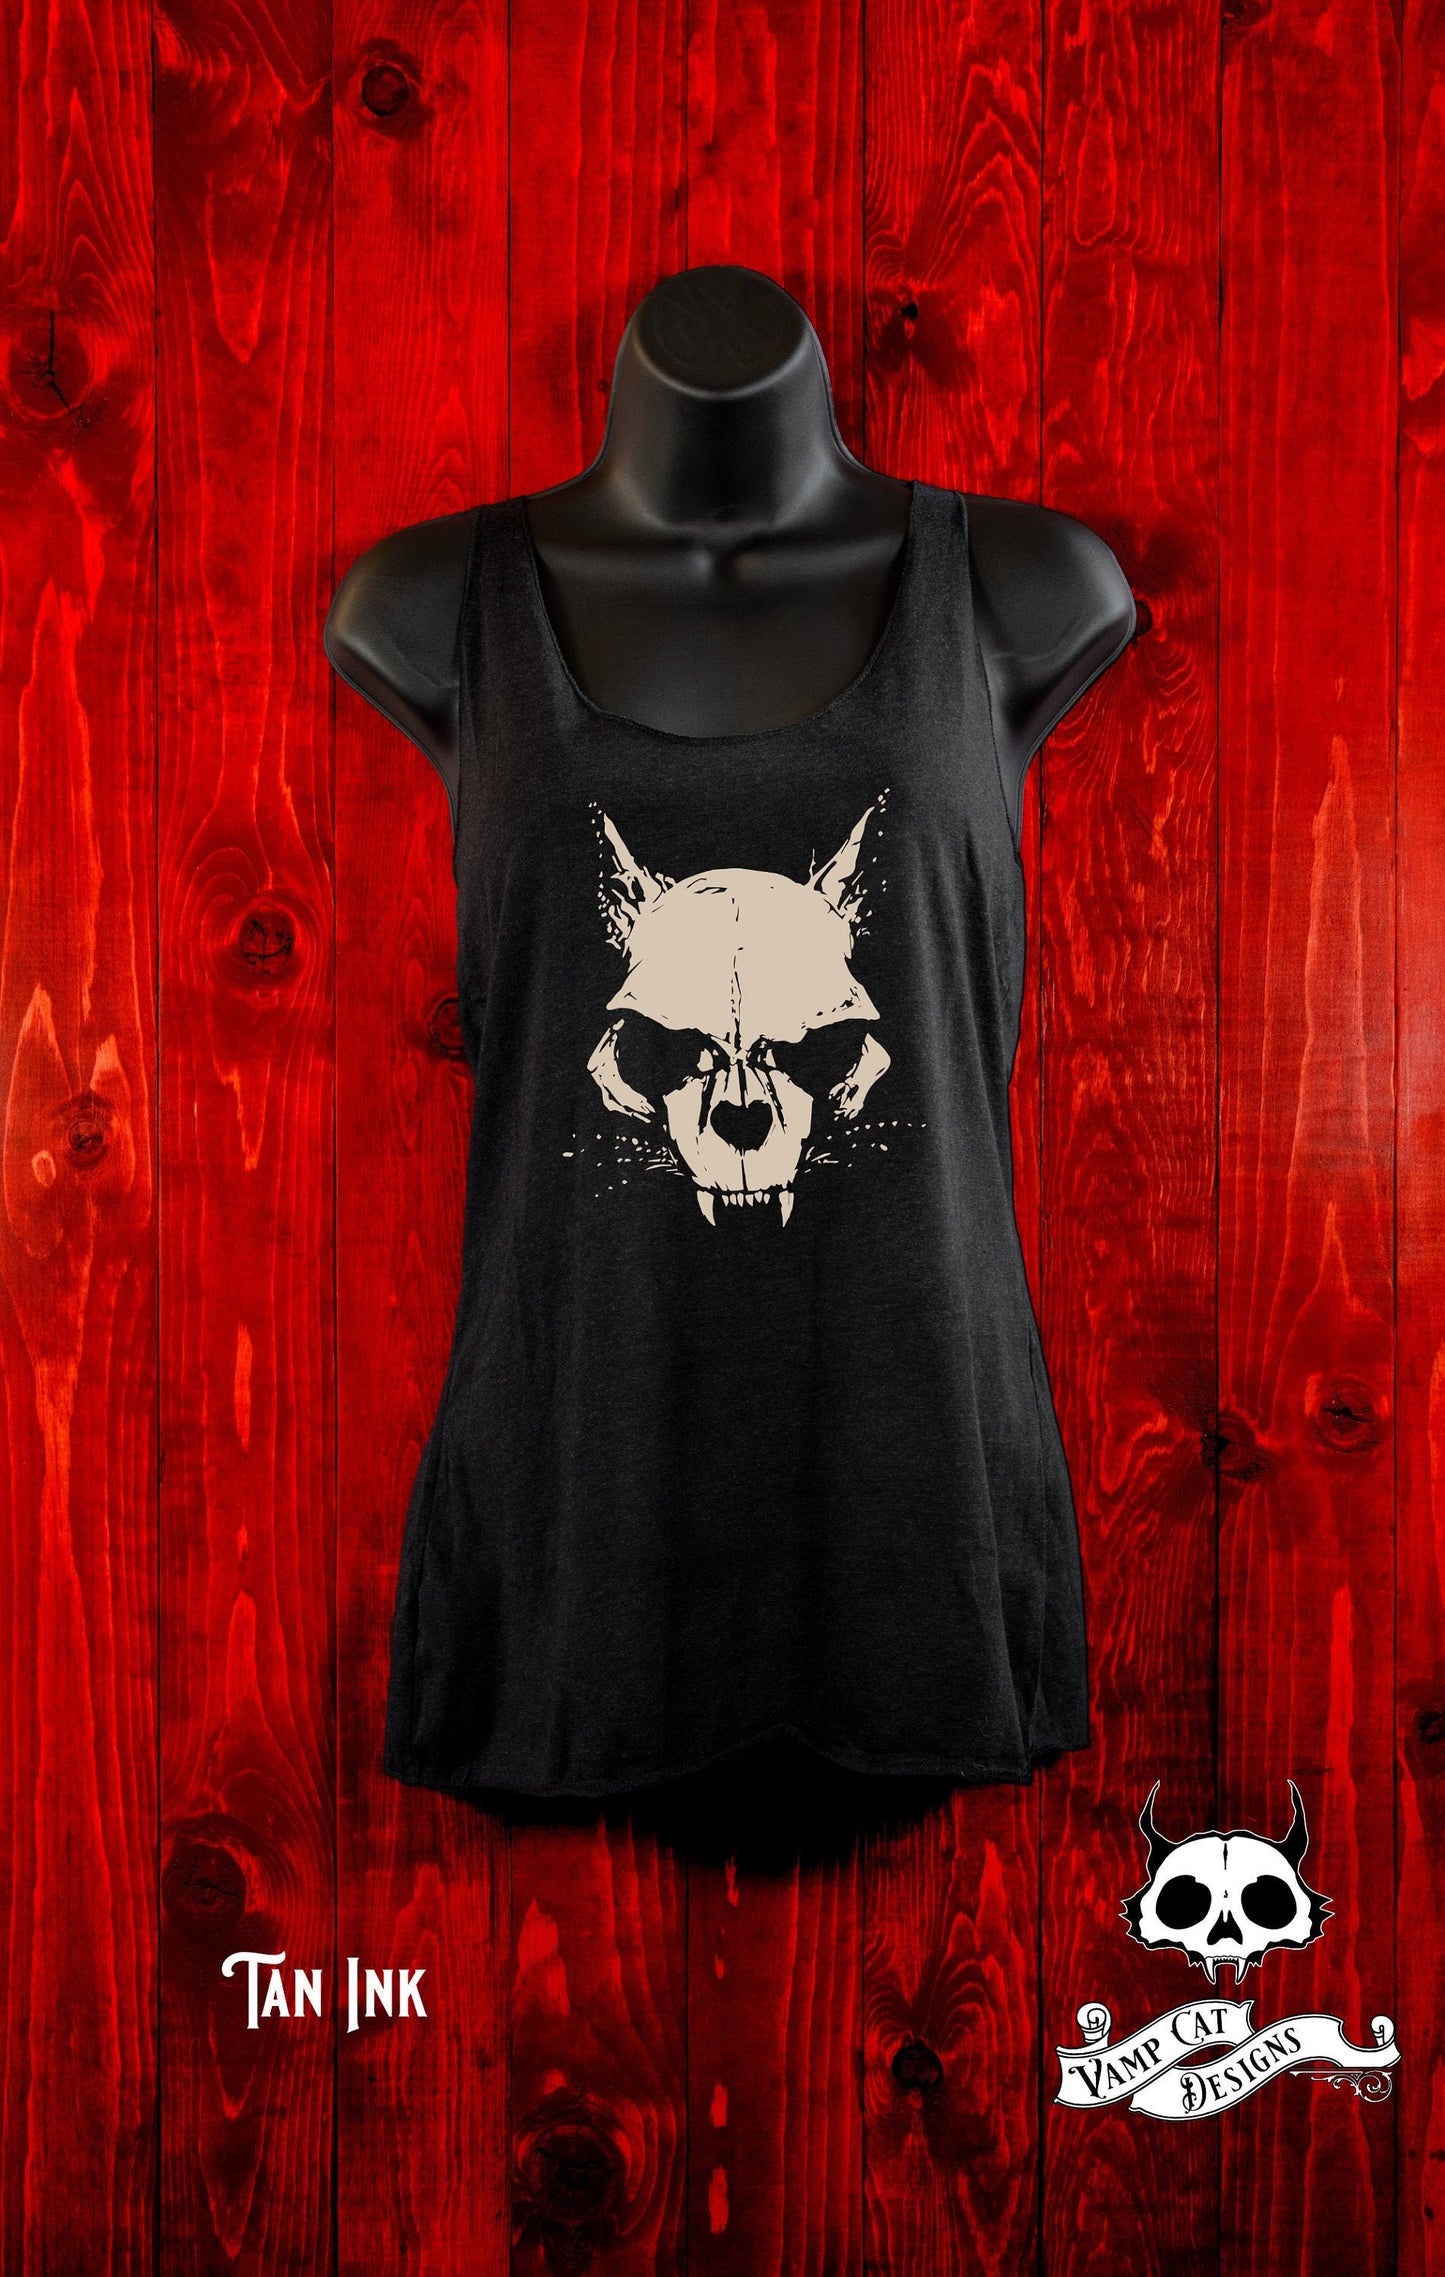 Skull Cat -Tank Top-Dark Apparel-Art Top-Cats-Skulls-Cat art-Evil Cat-Witchy-Comfy Tank-Gifts For Her-Cat Lovers-Casual Wear-Gothic Gifts